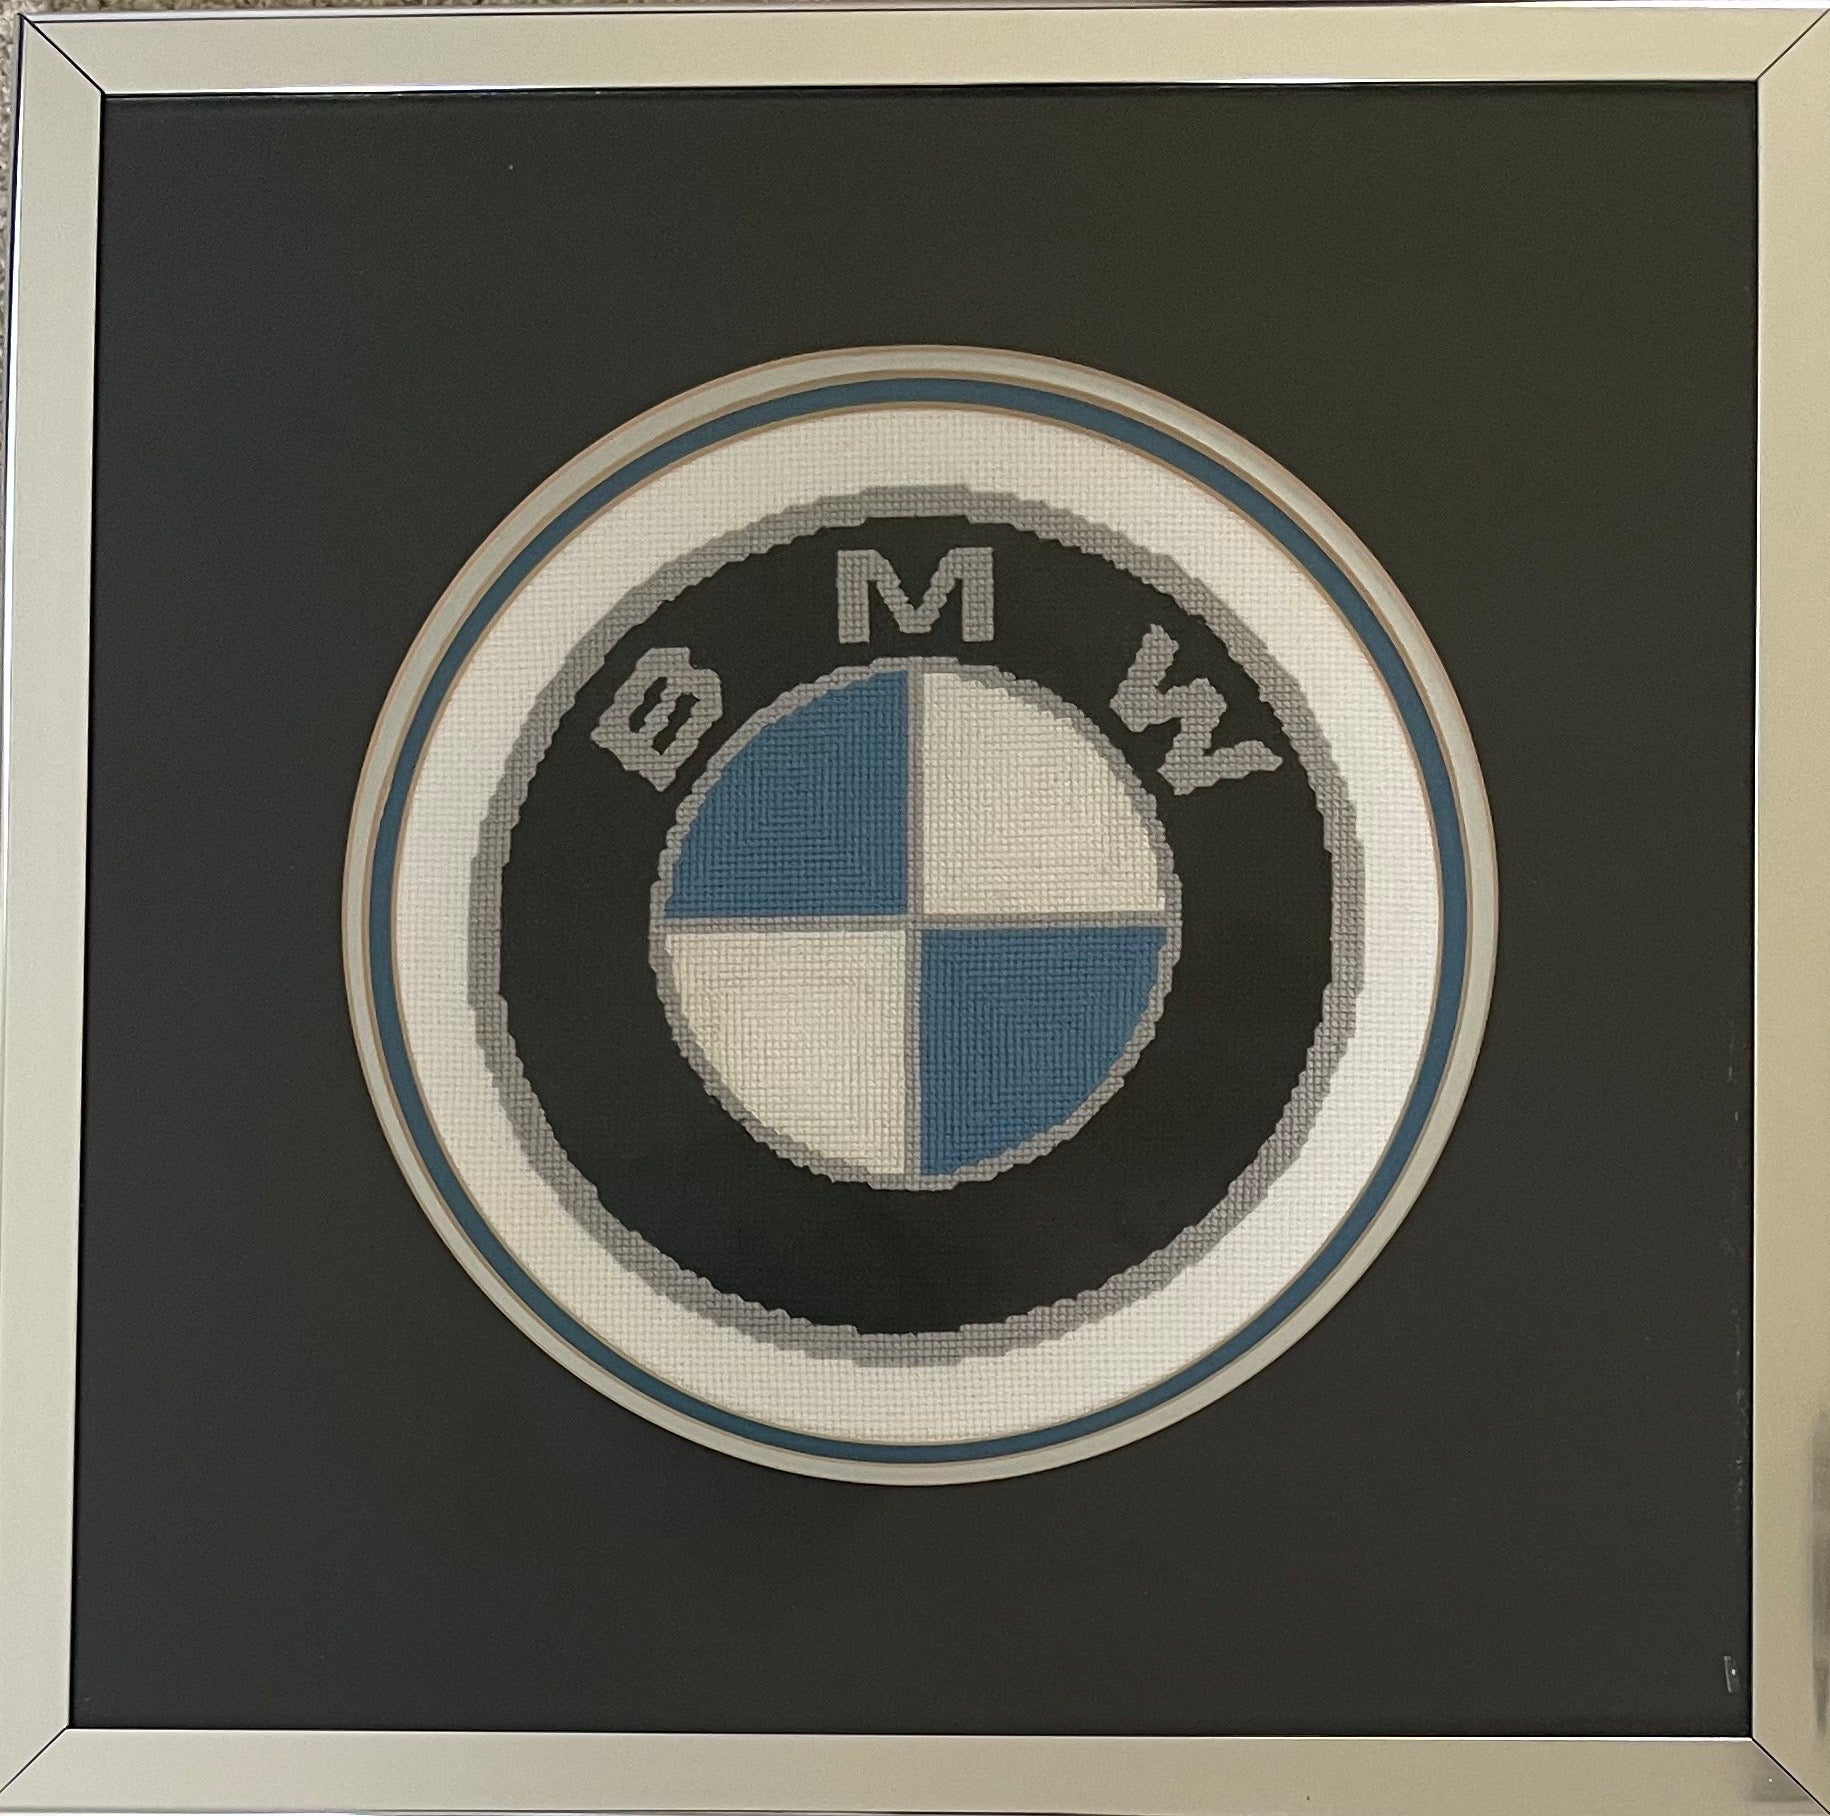 A very well done BMW embroidered logo housed in a silver frame with glass and hanging wire to back. The piece is in very good condition and measures 17